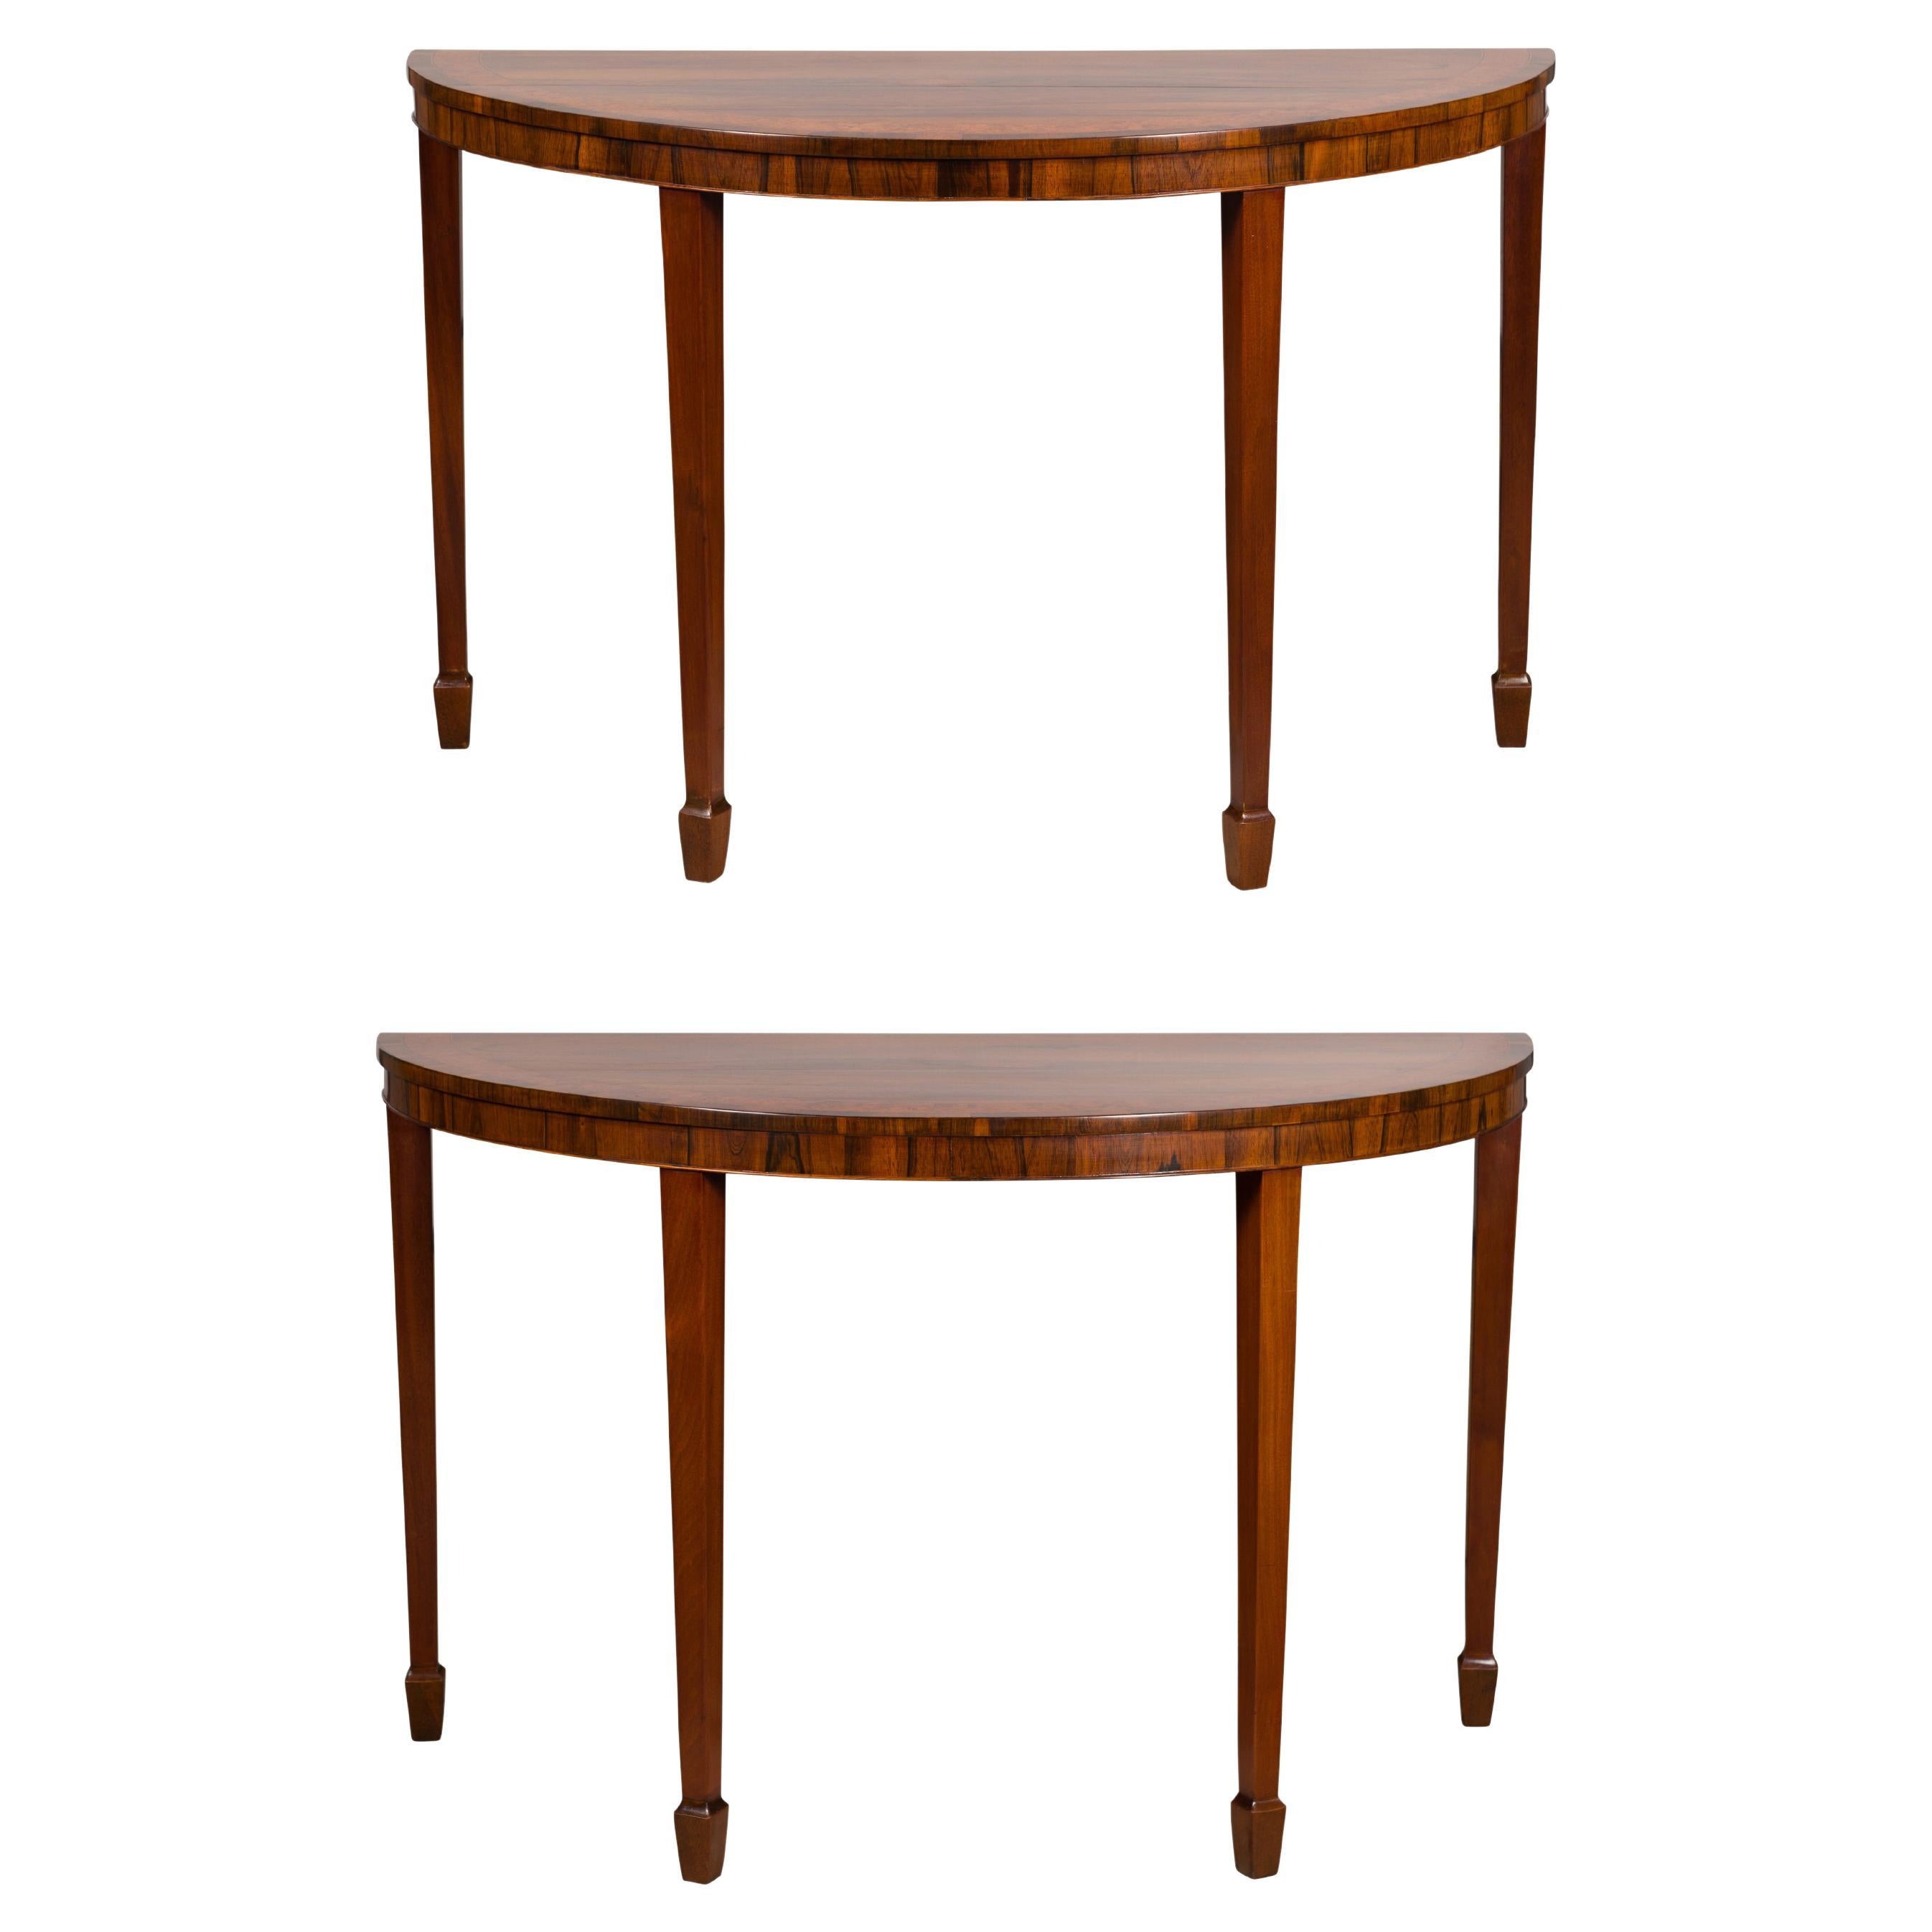 English 19th Century Mahogany Demilune Console Tables with Tapered Legs, a Pair